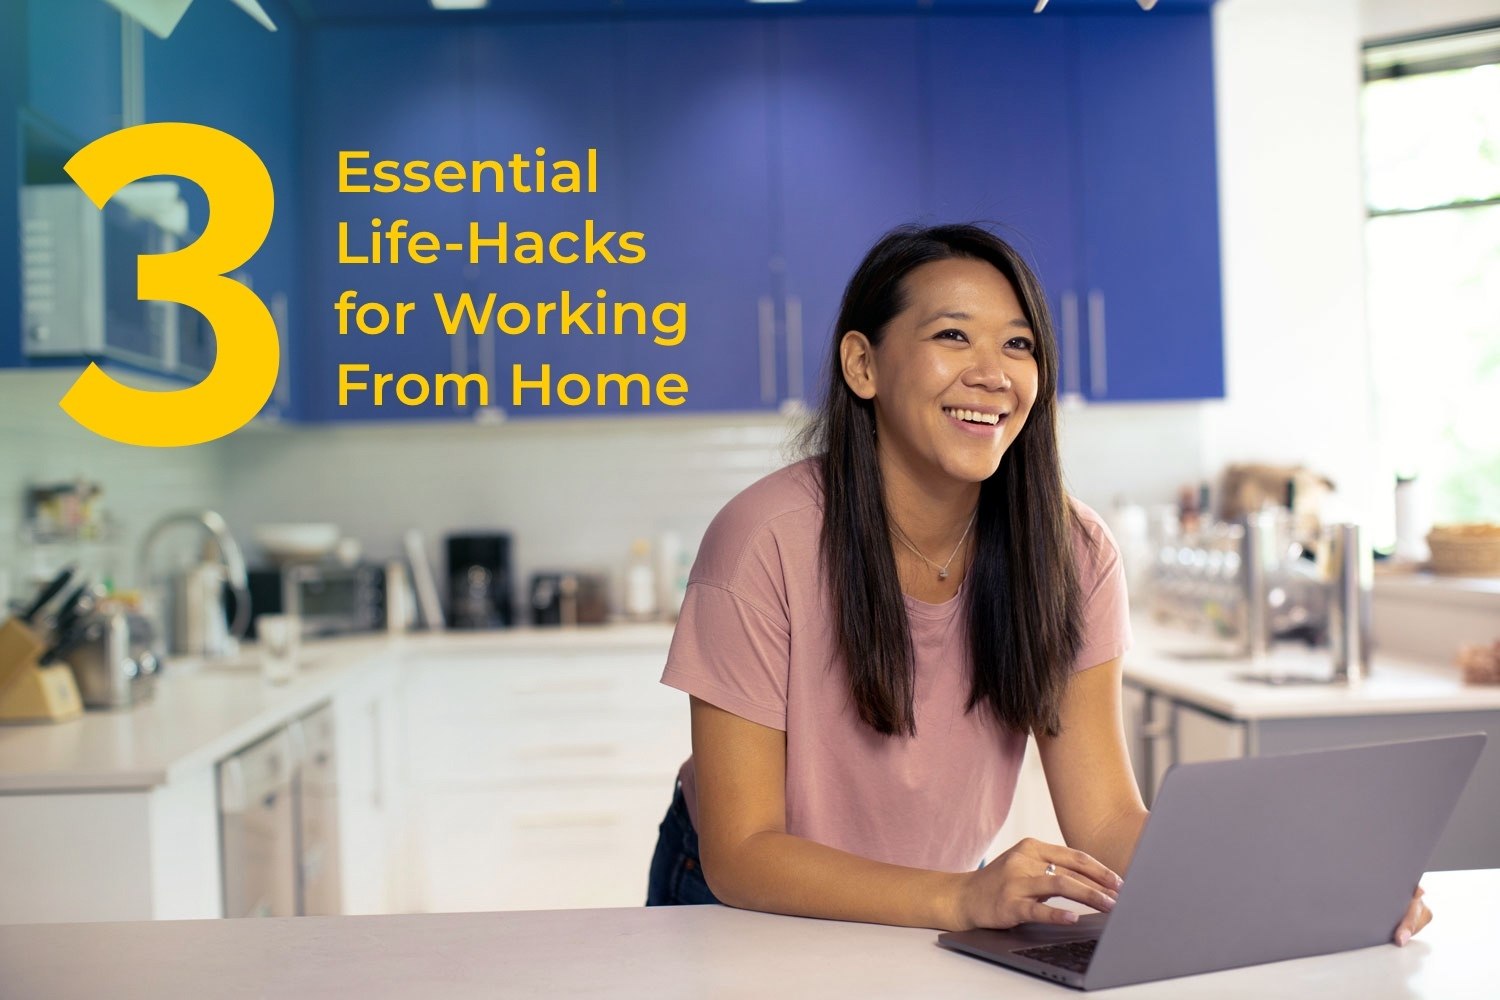 3 Essential Life-Hacks for Working From Home